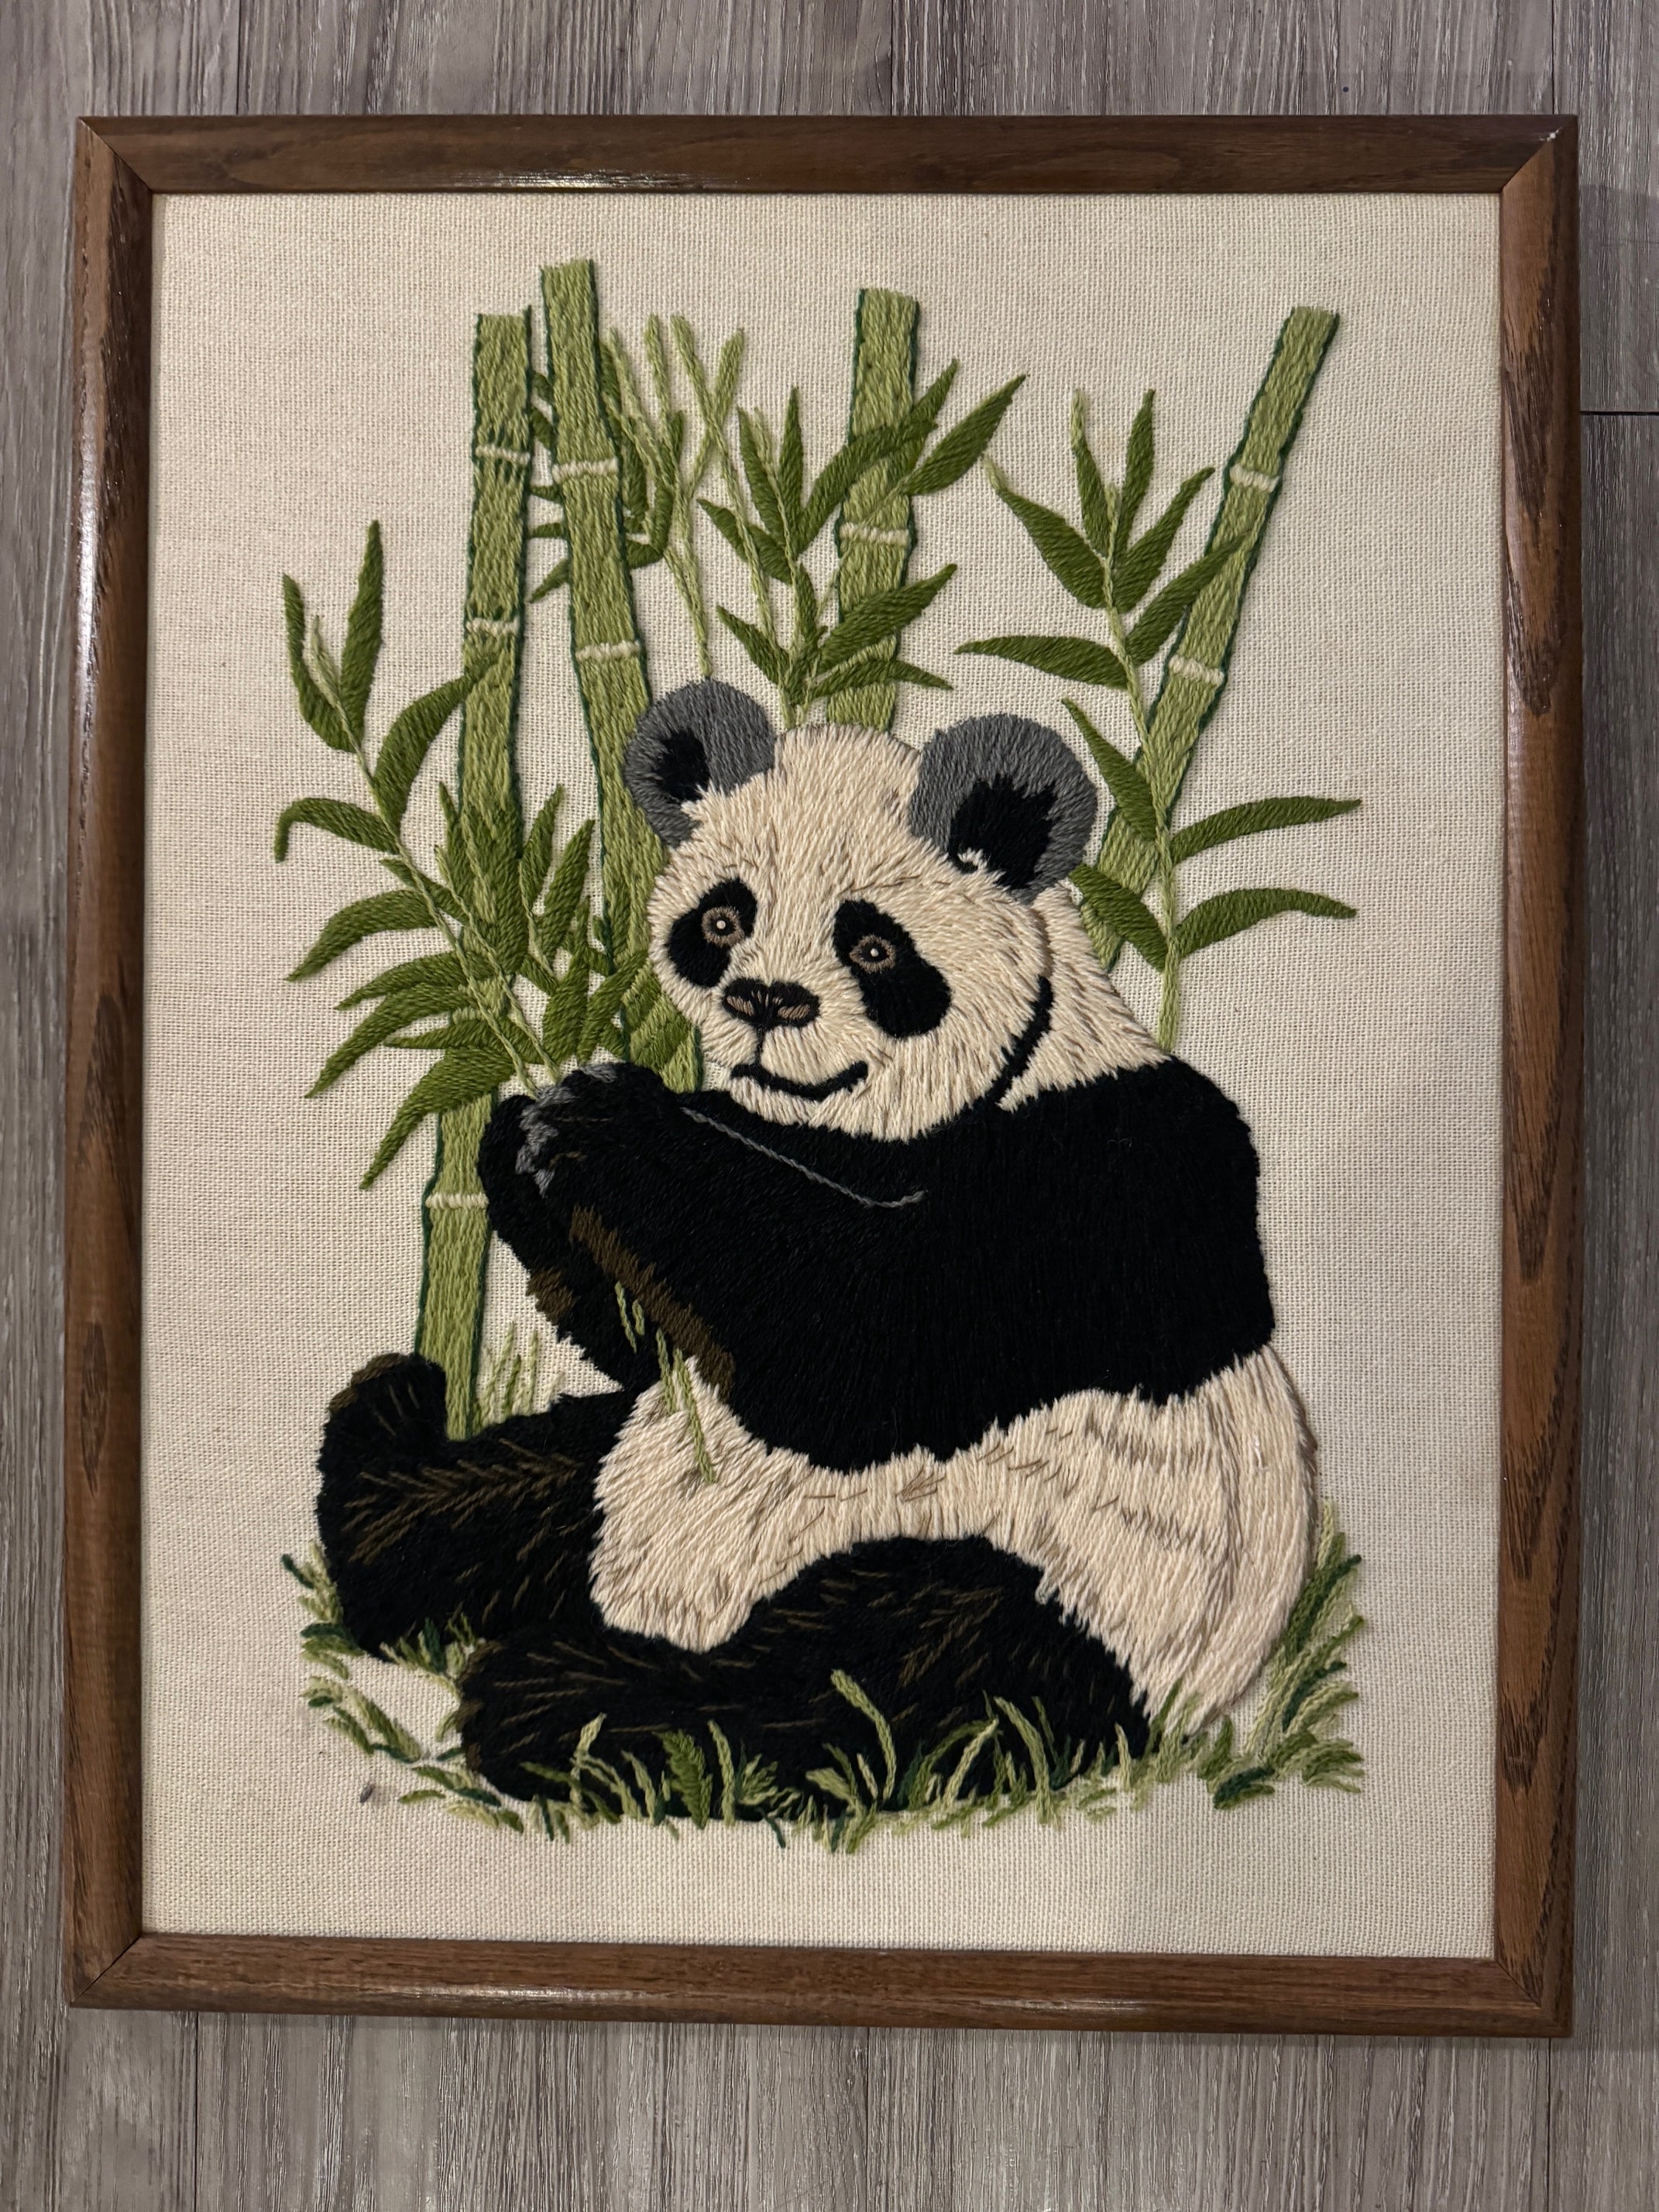 SUITS TV Series S03E11 Set of Panda Embroidery Prop from Mike Ross Apartment